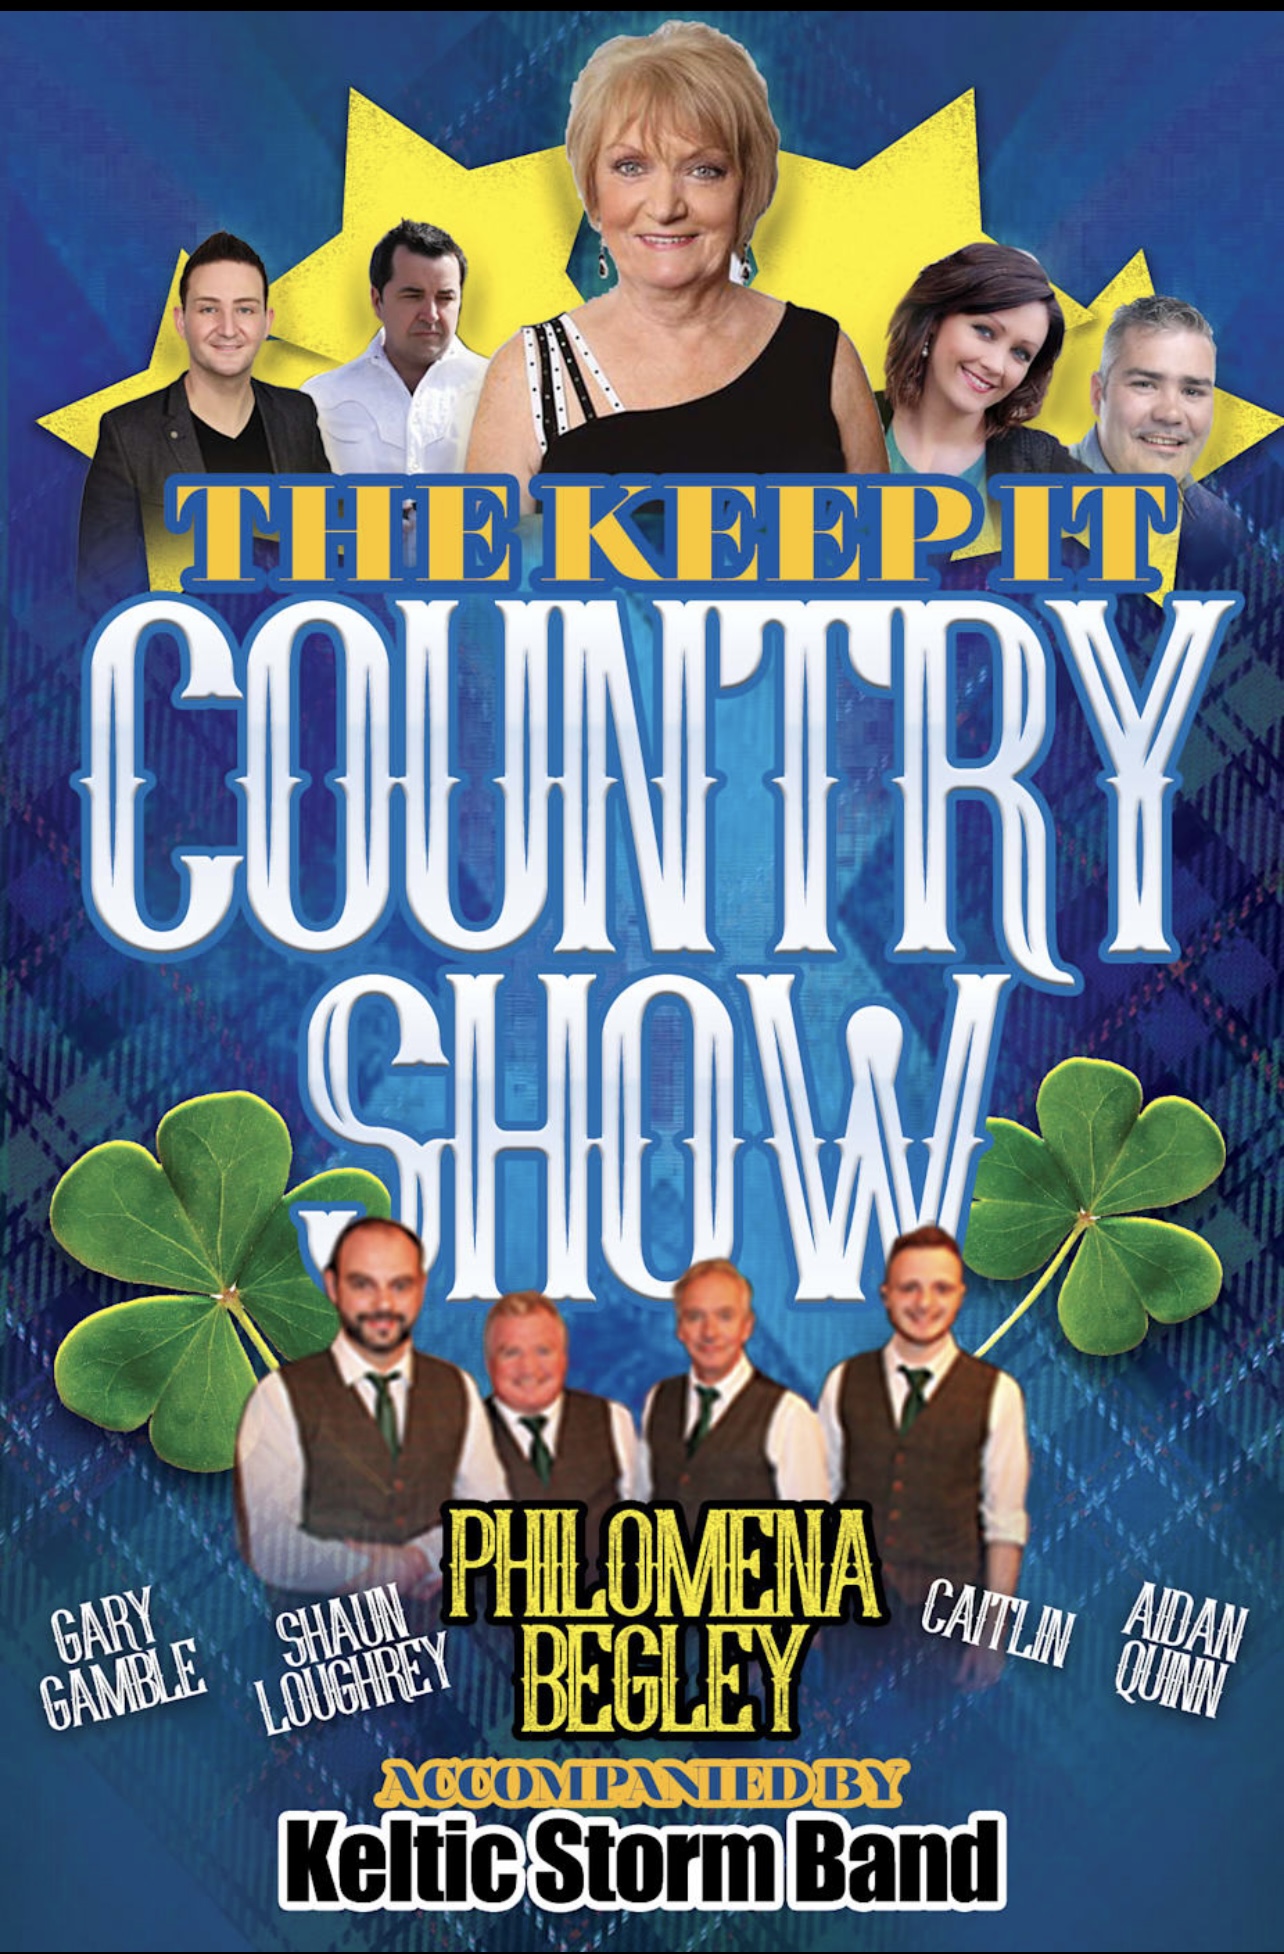 The Keep it Country Show